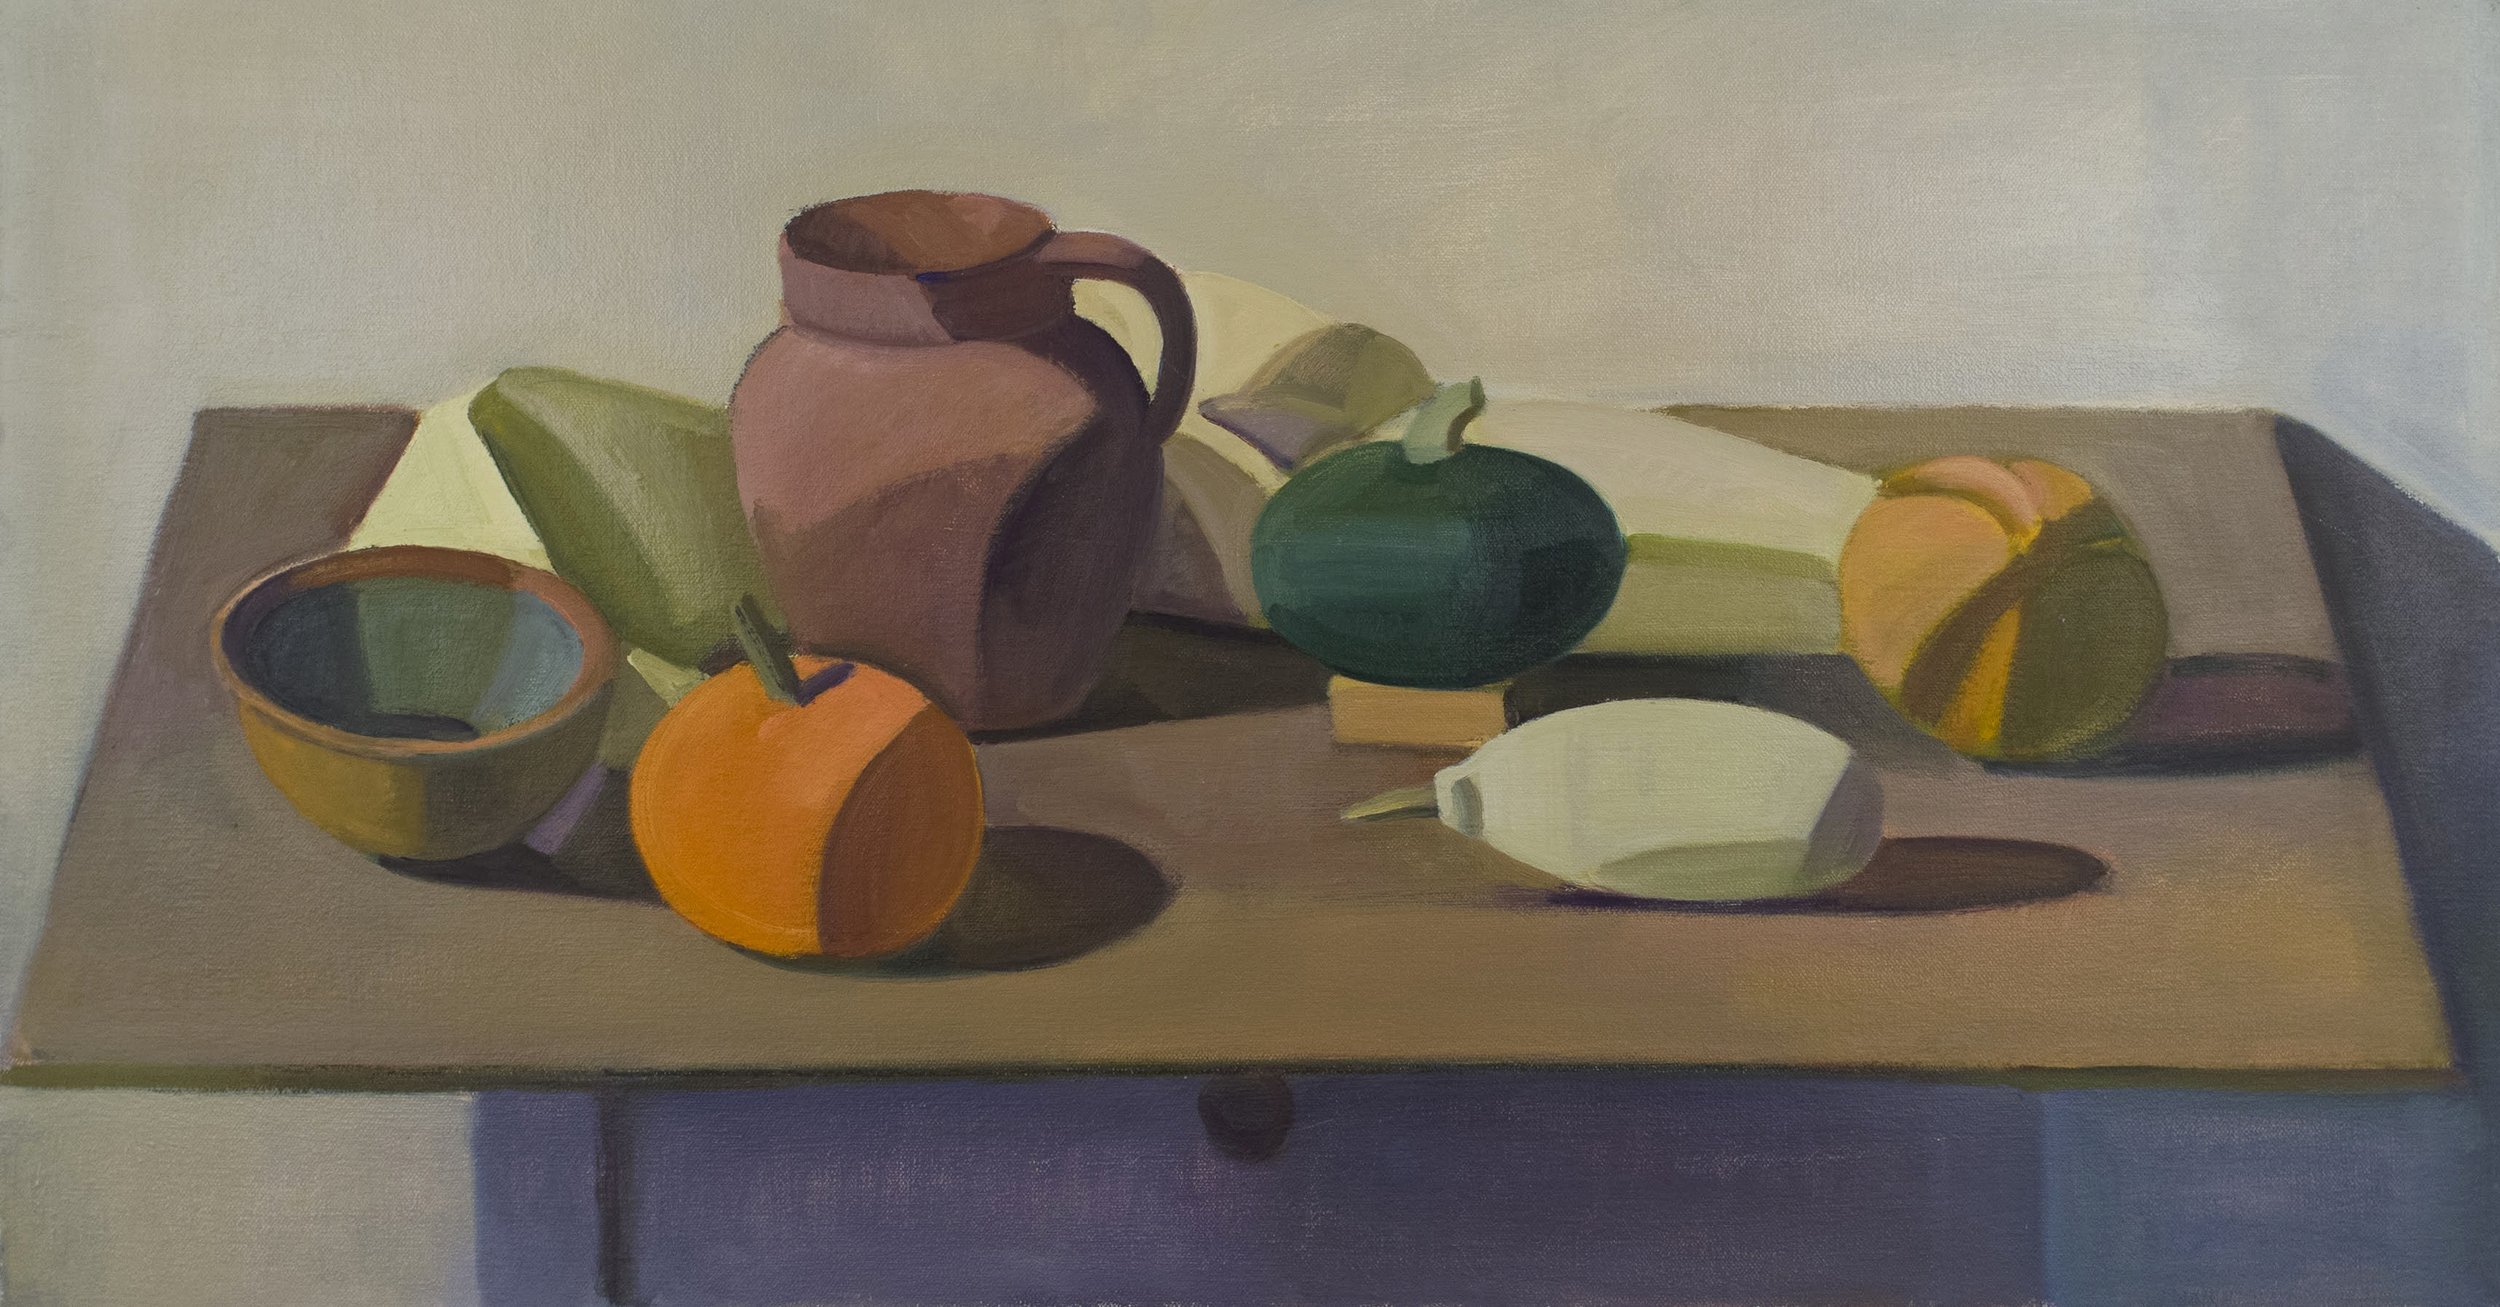   Oatmeal Bowl, Clay Pitcher and Squashes #2 , 2004, oil/canvas unframed, 16 x 30 in., $3,000 